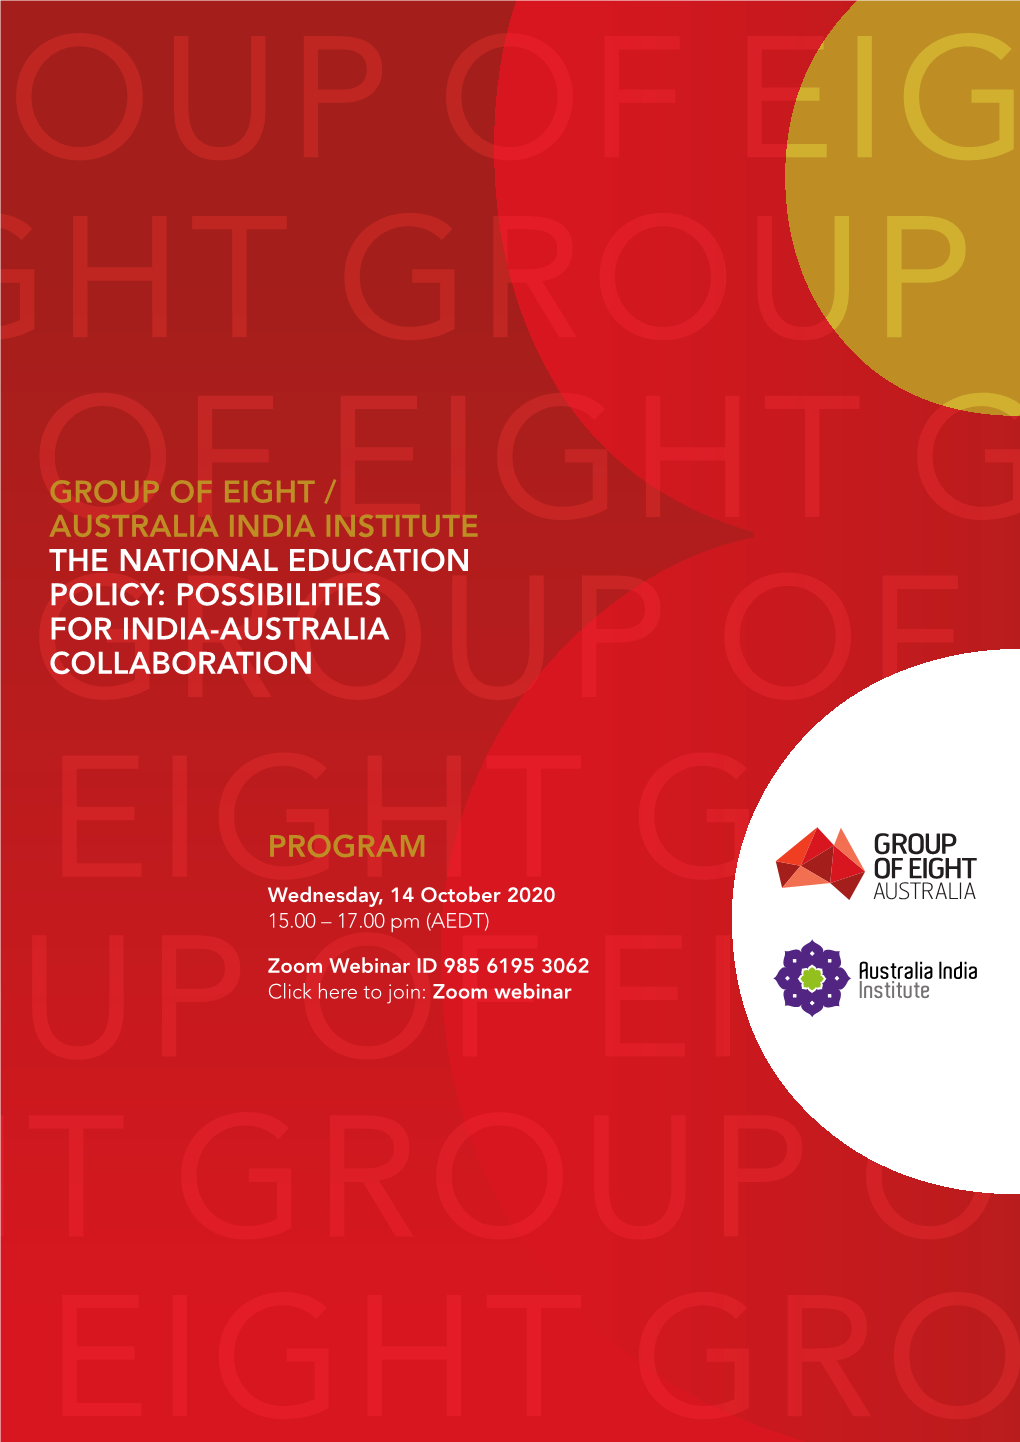 Group of Eight / Australia India Institute up Ofthe National Educationeight Gro Policy: Possibilities for India-Australia Ht Groupcollaboration of Eig